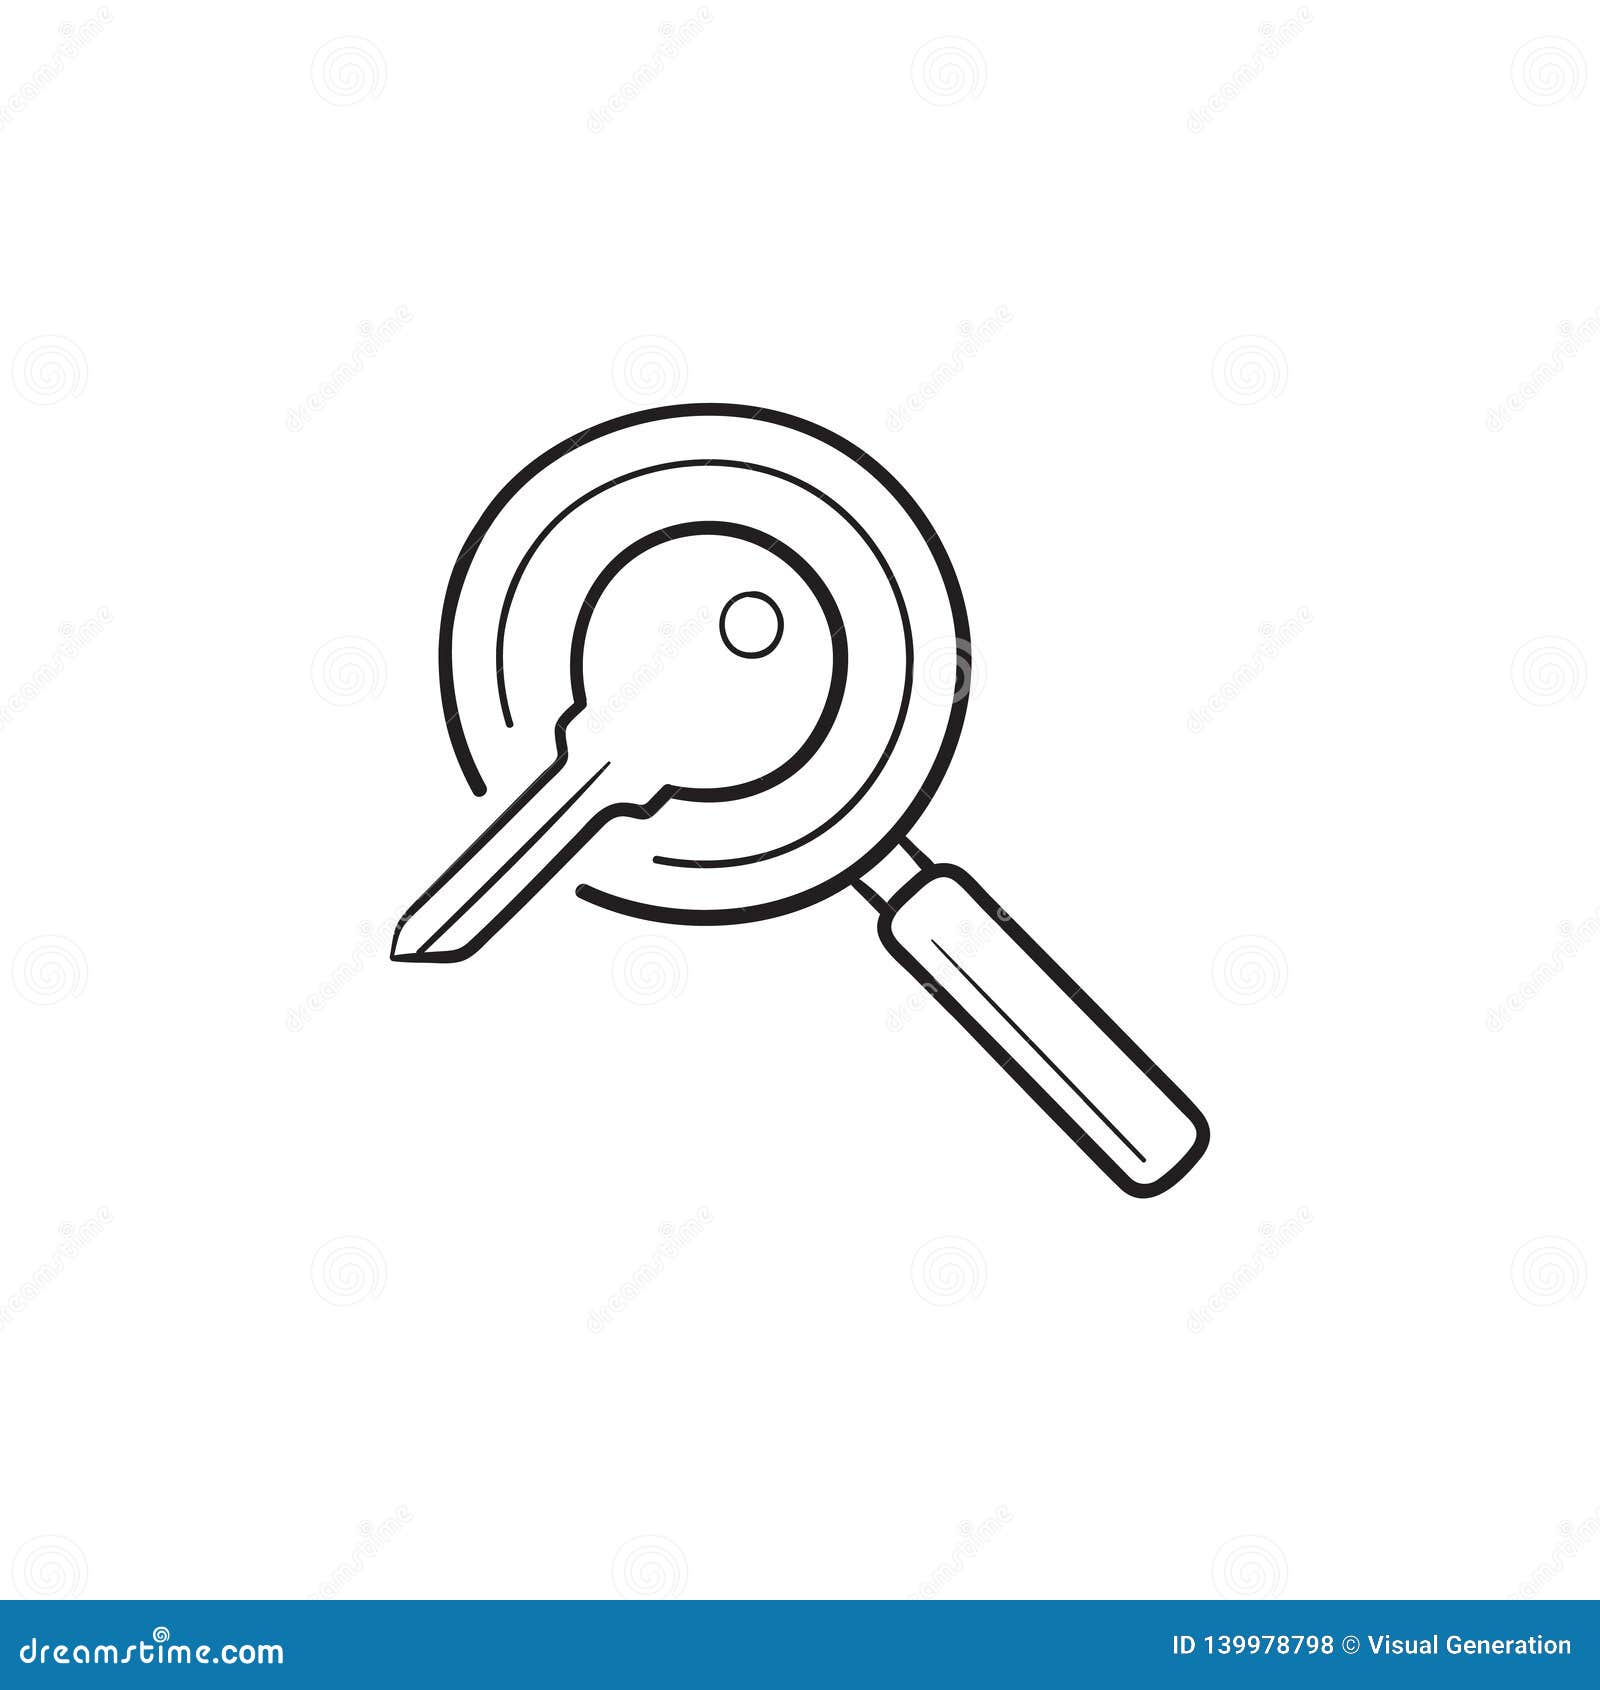 Keyword Search Hand Drawn Outline Doodle Icon Stock Vector Illustration Of Research Media